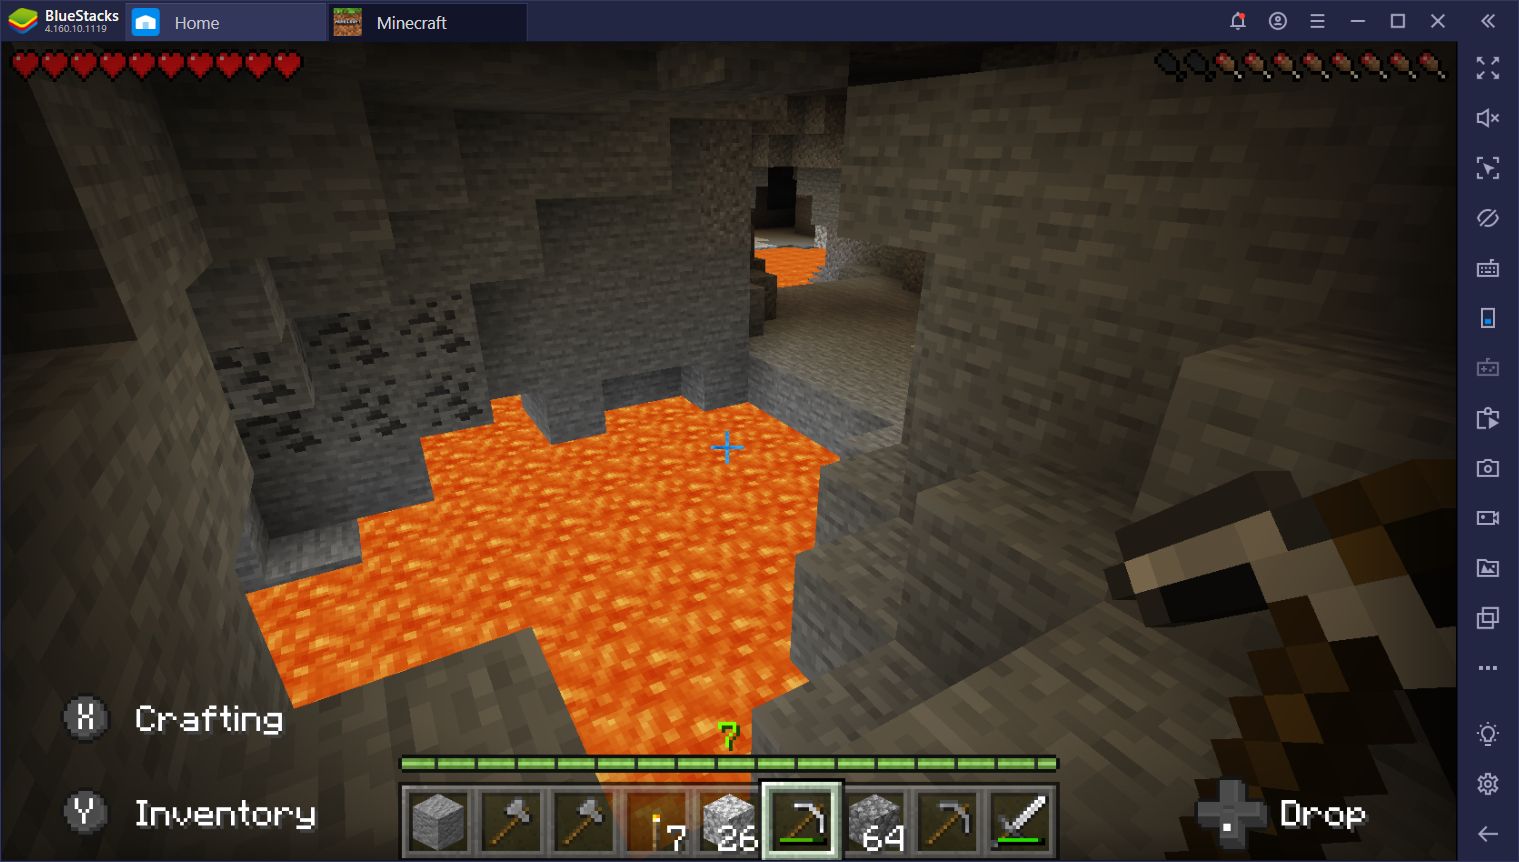 Mining in Minecraft – How to Gather Materials and Stay Safe in the Process